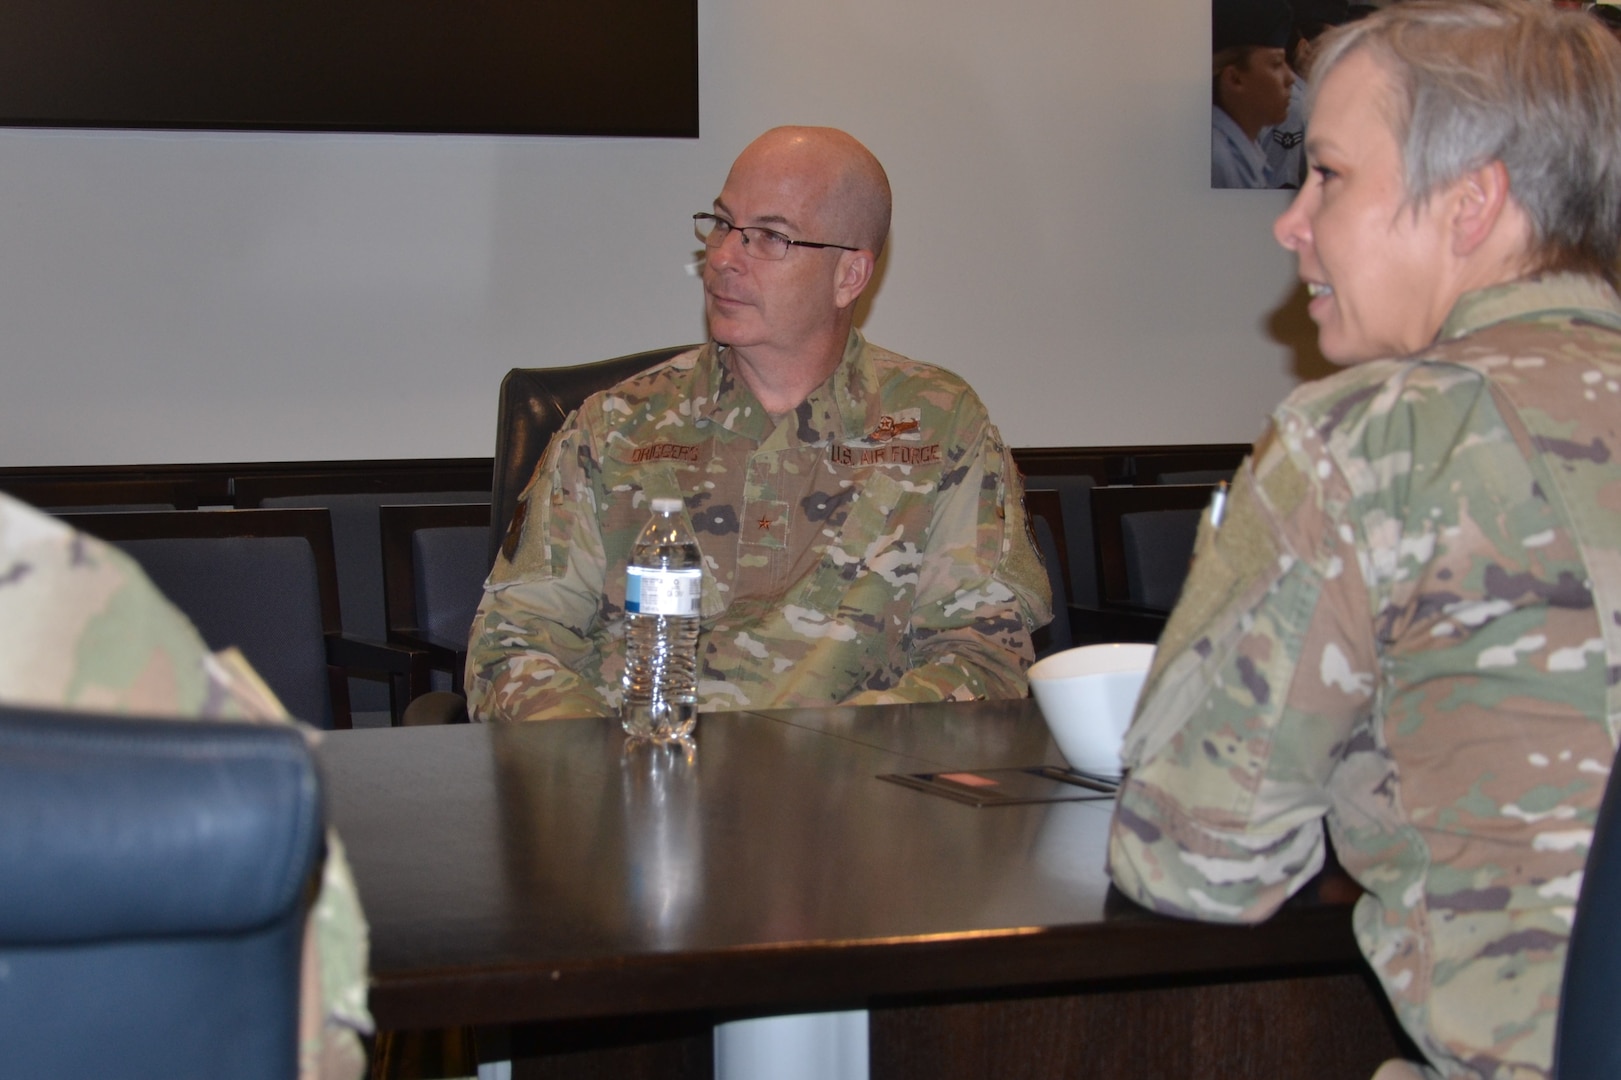 Military general sitting at table listening to others speak.